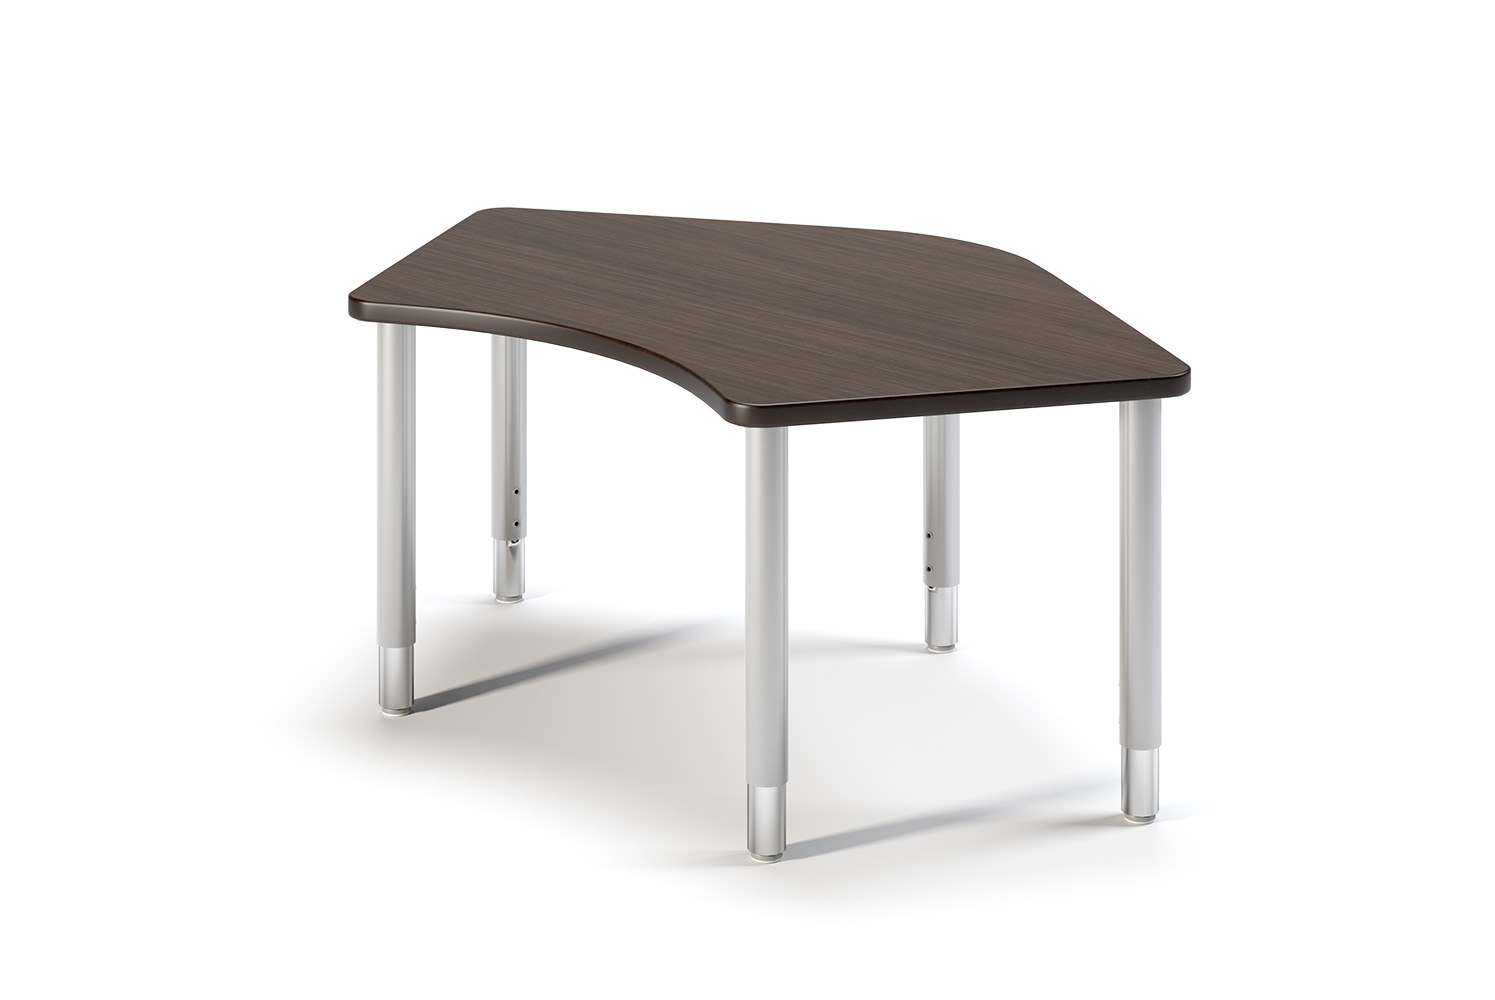 Mingle Boomer Training Table, dark stain table top